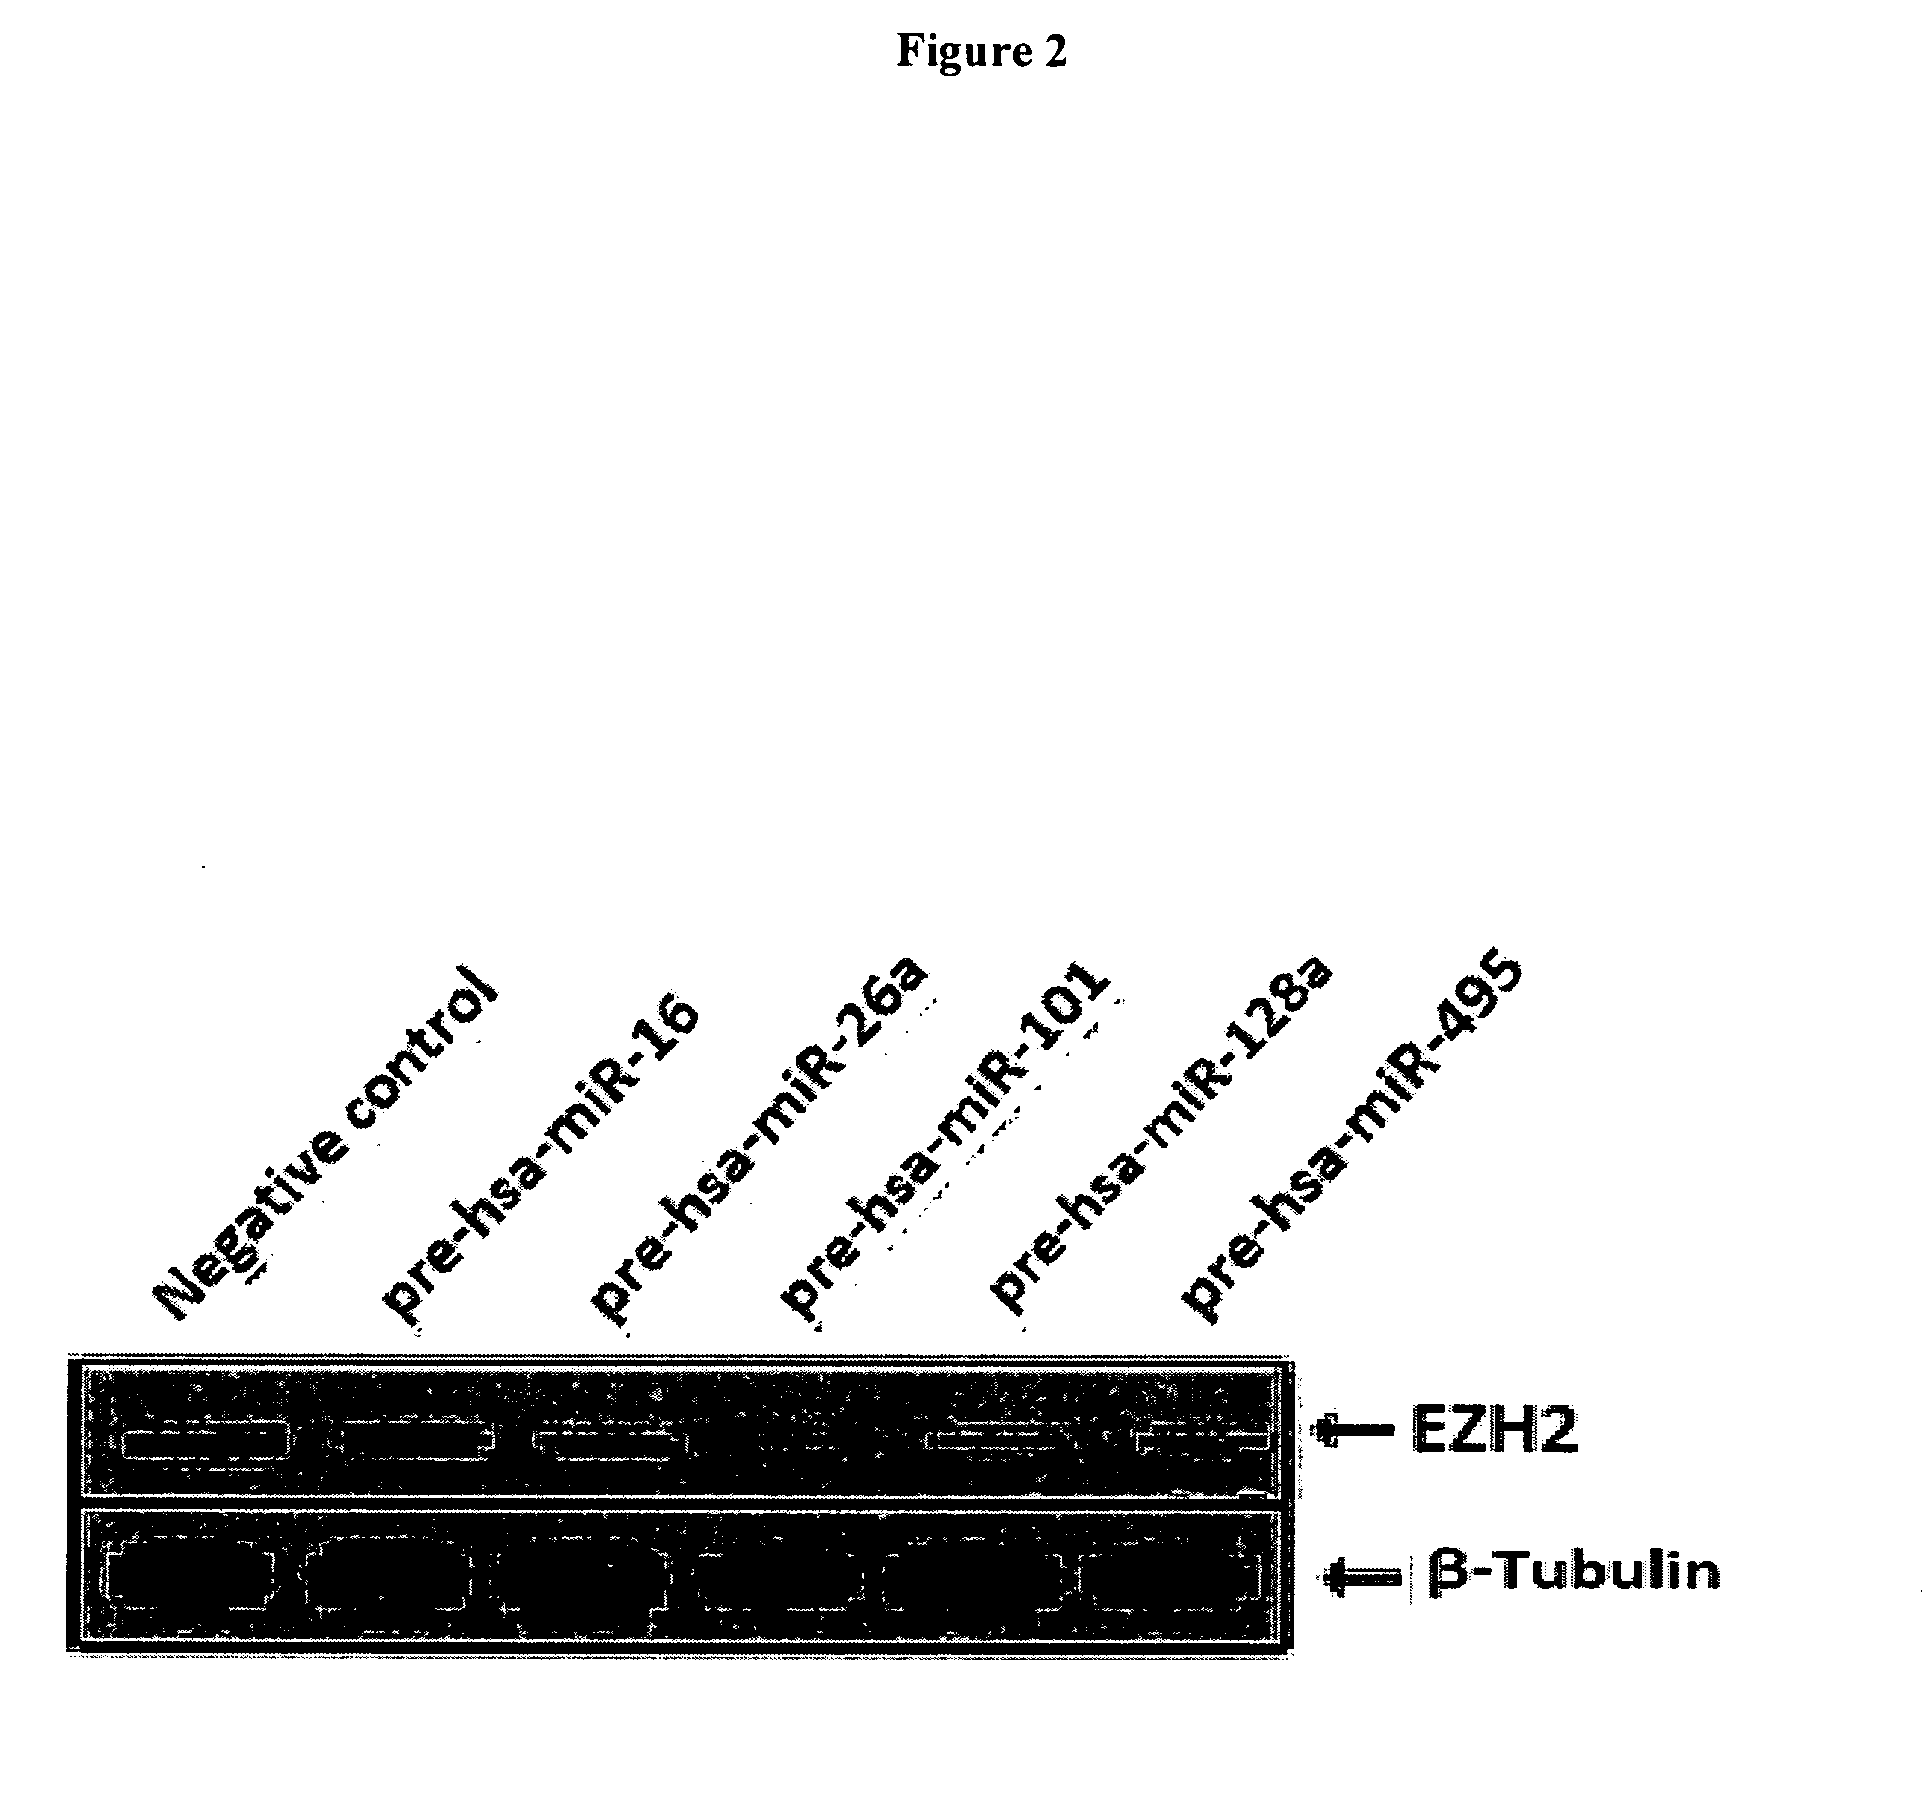 EZH2 Cancer Markers